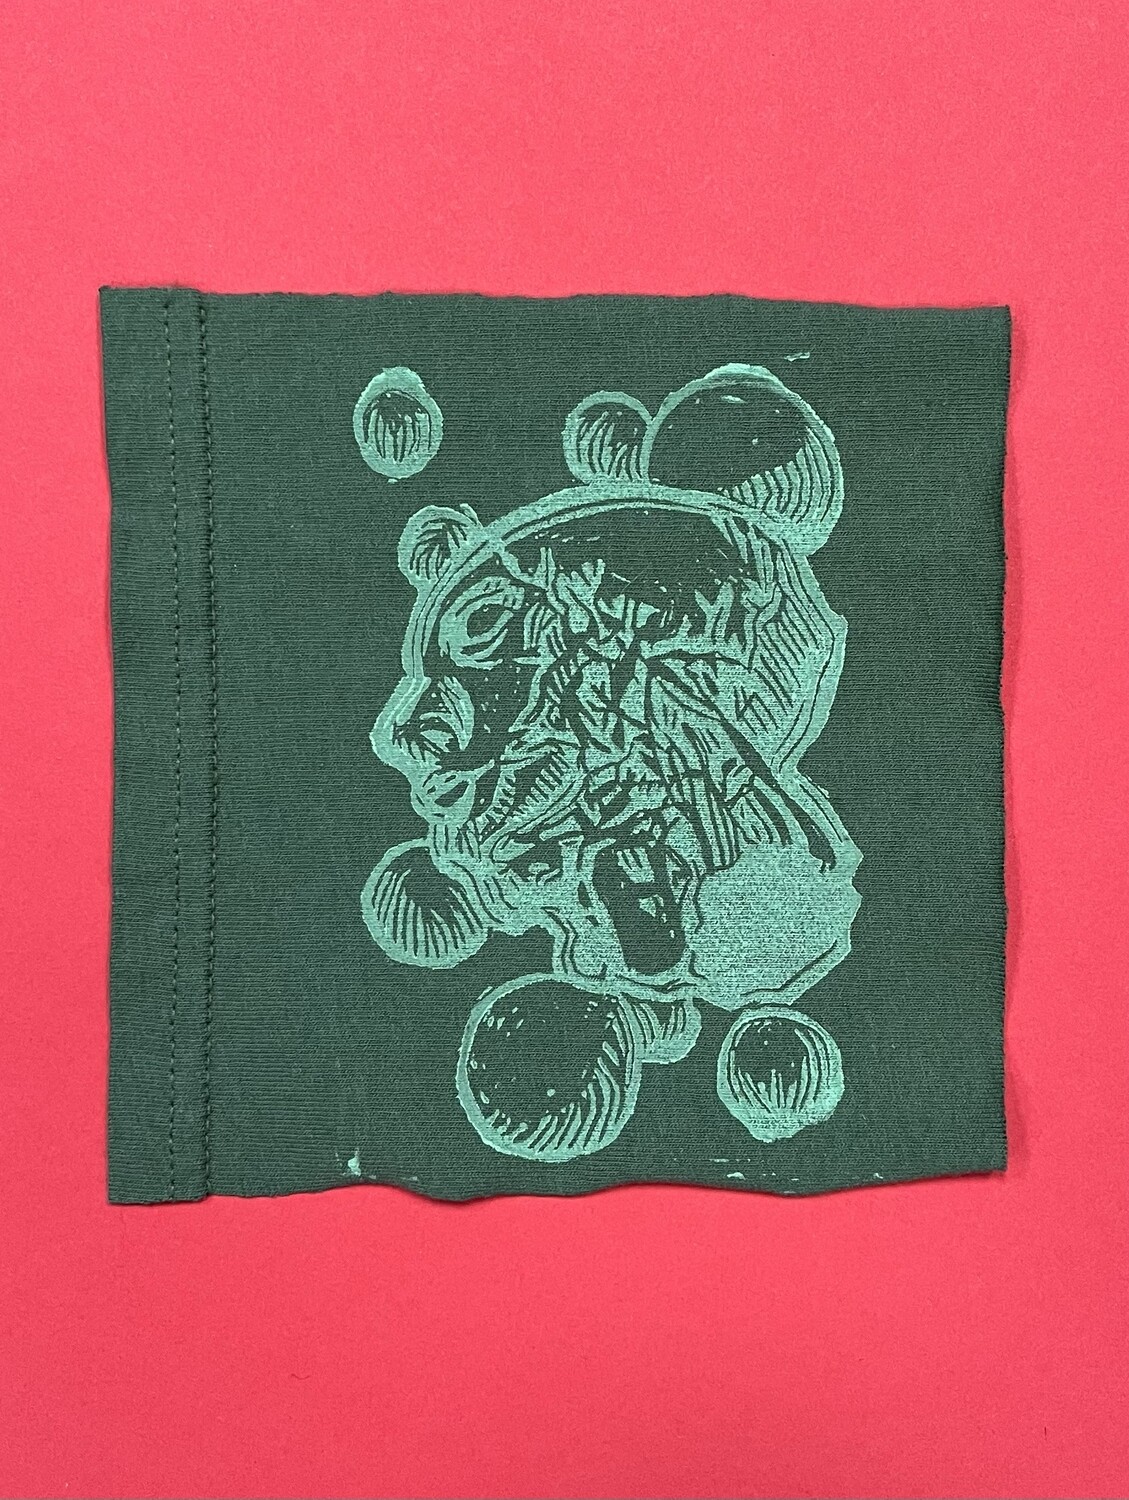 Tilted Head - Block Print Patch by Push/Pull